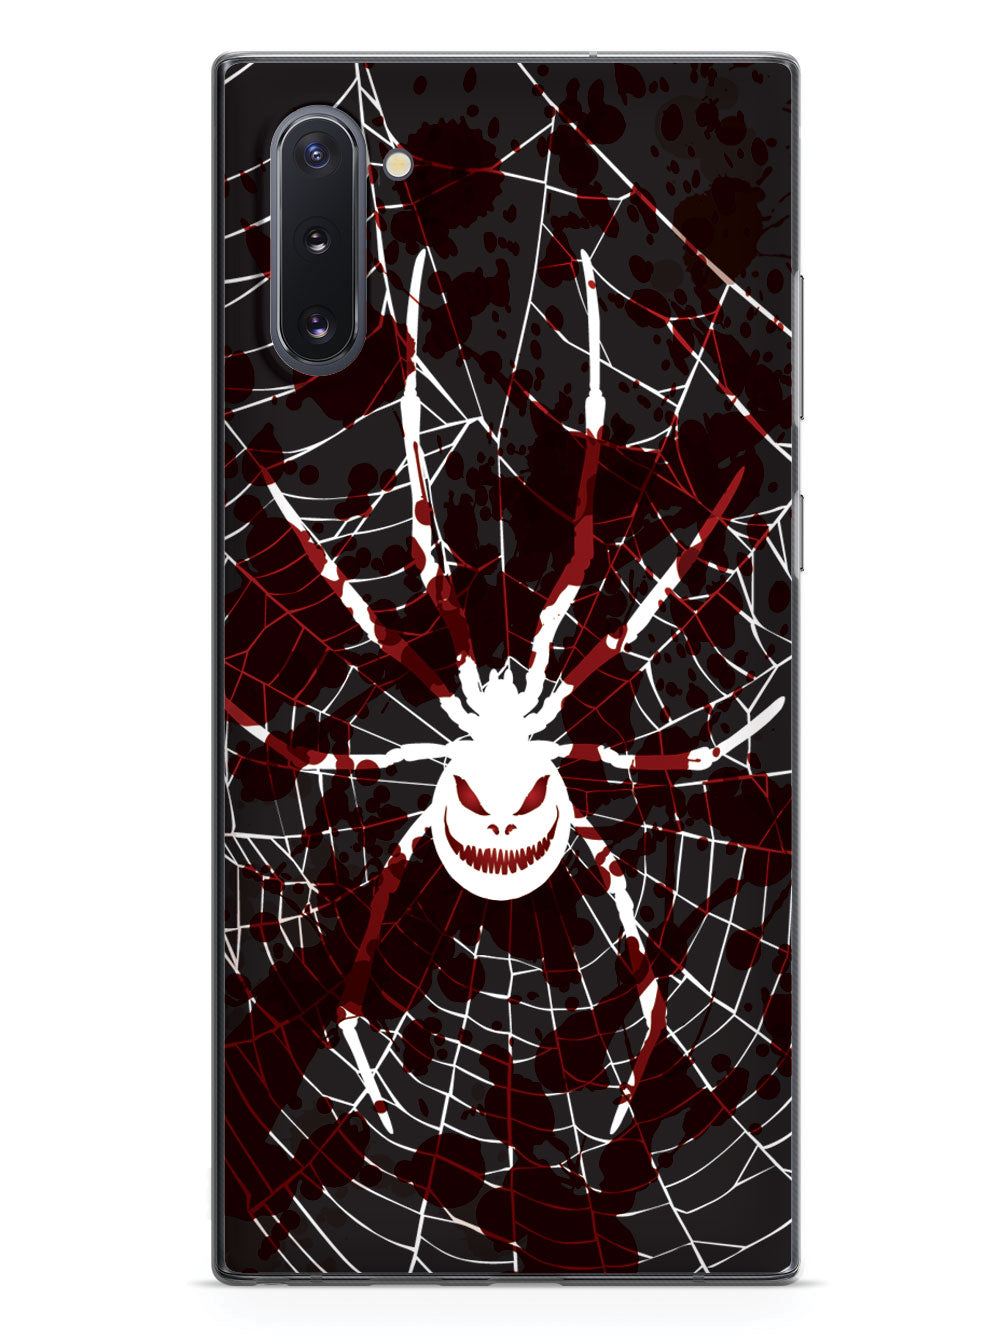 Spooky Spider - Bloodstained Cobweb Case